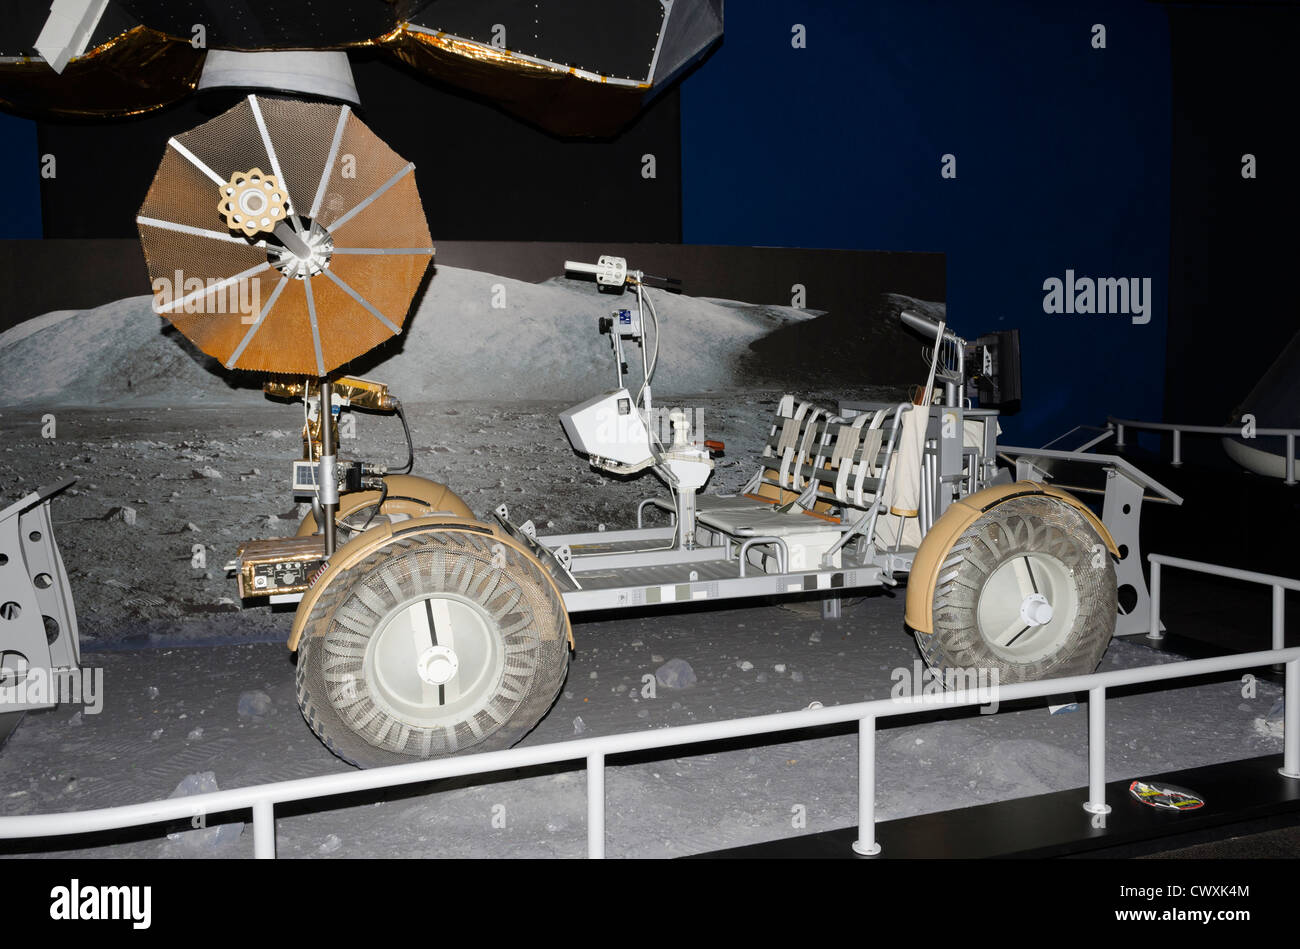 Moon Buggy High Resolution Stock Photography and Images - Alamy